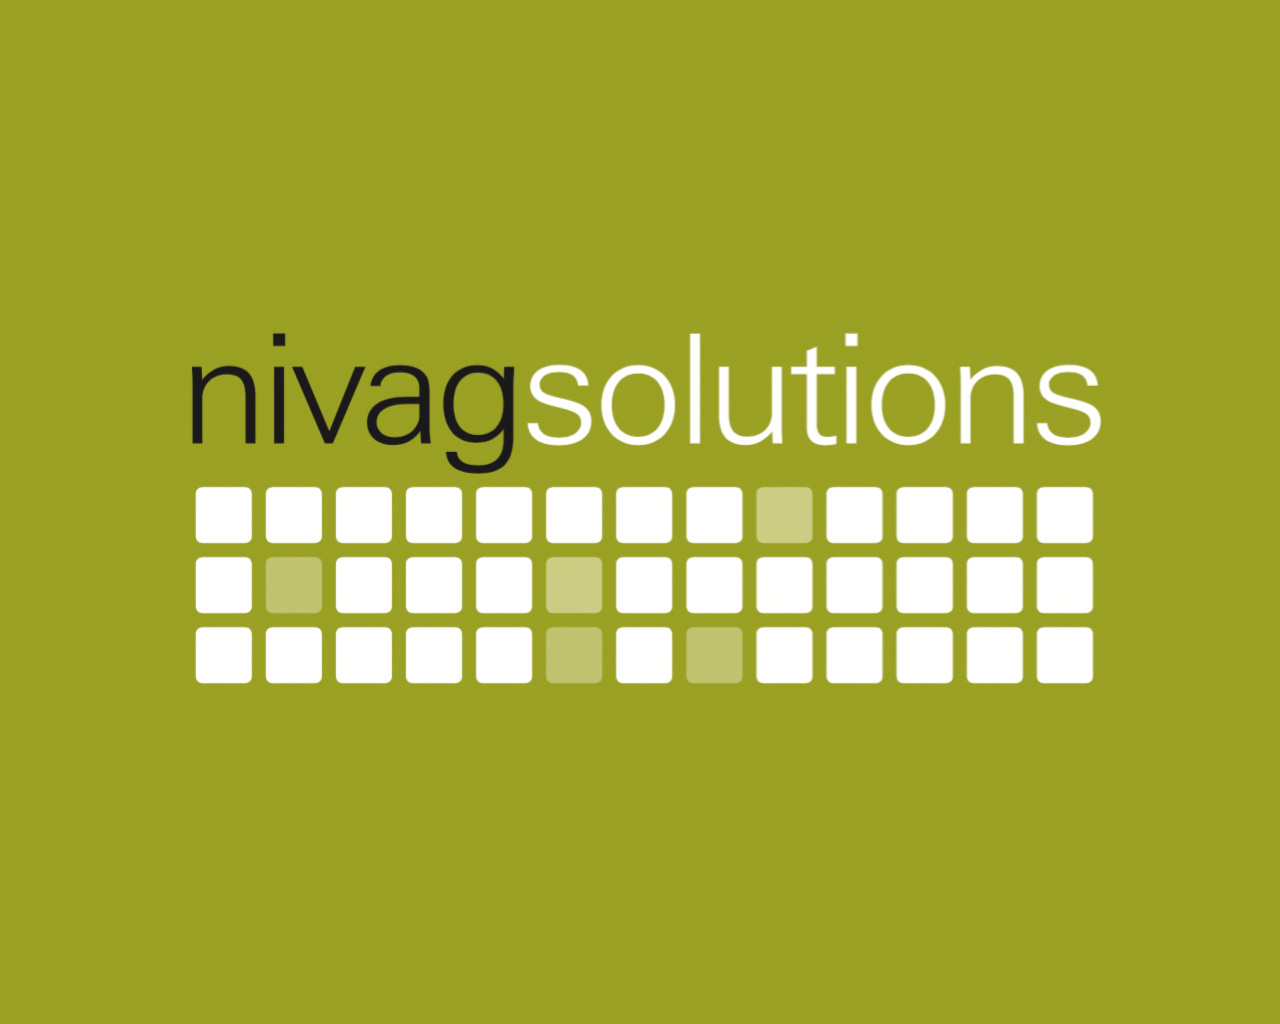 nivag solutions